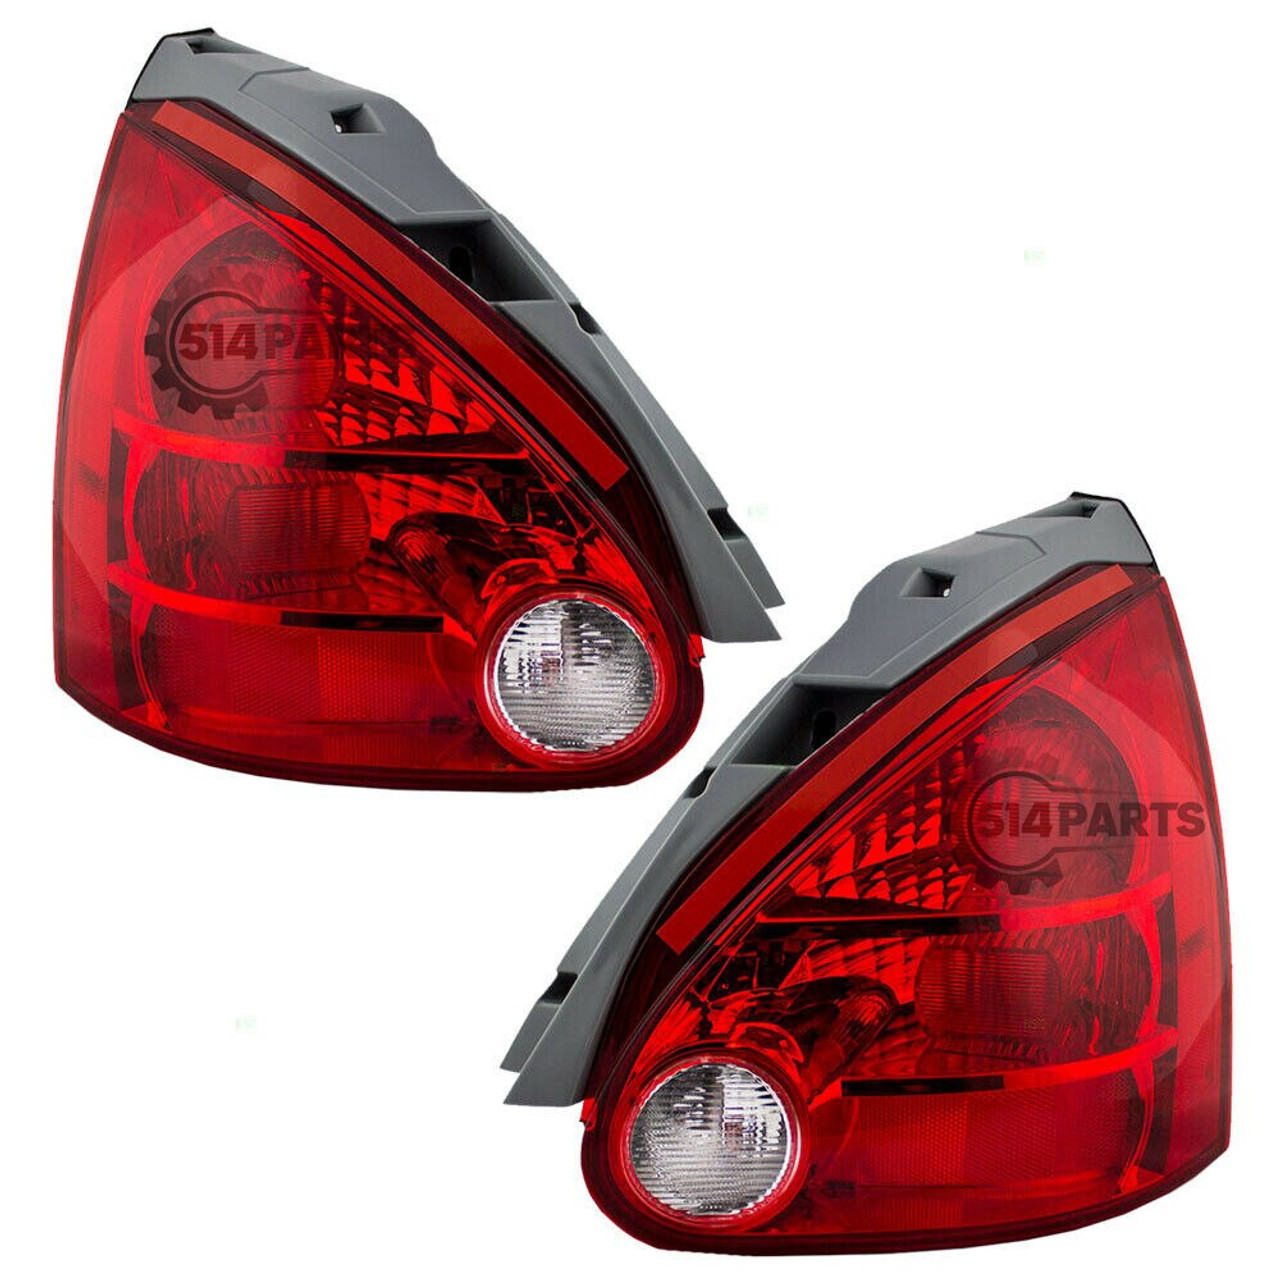 2004 - 2008 NISSAN MAXIMA TAIL LIGHTS - PHARES ARRIERE